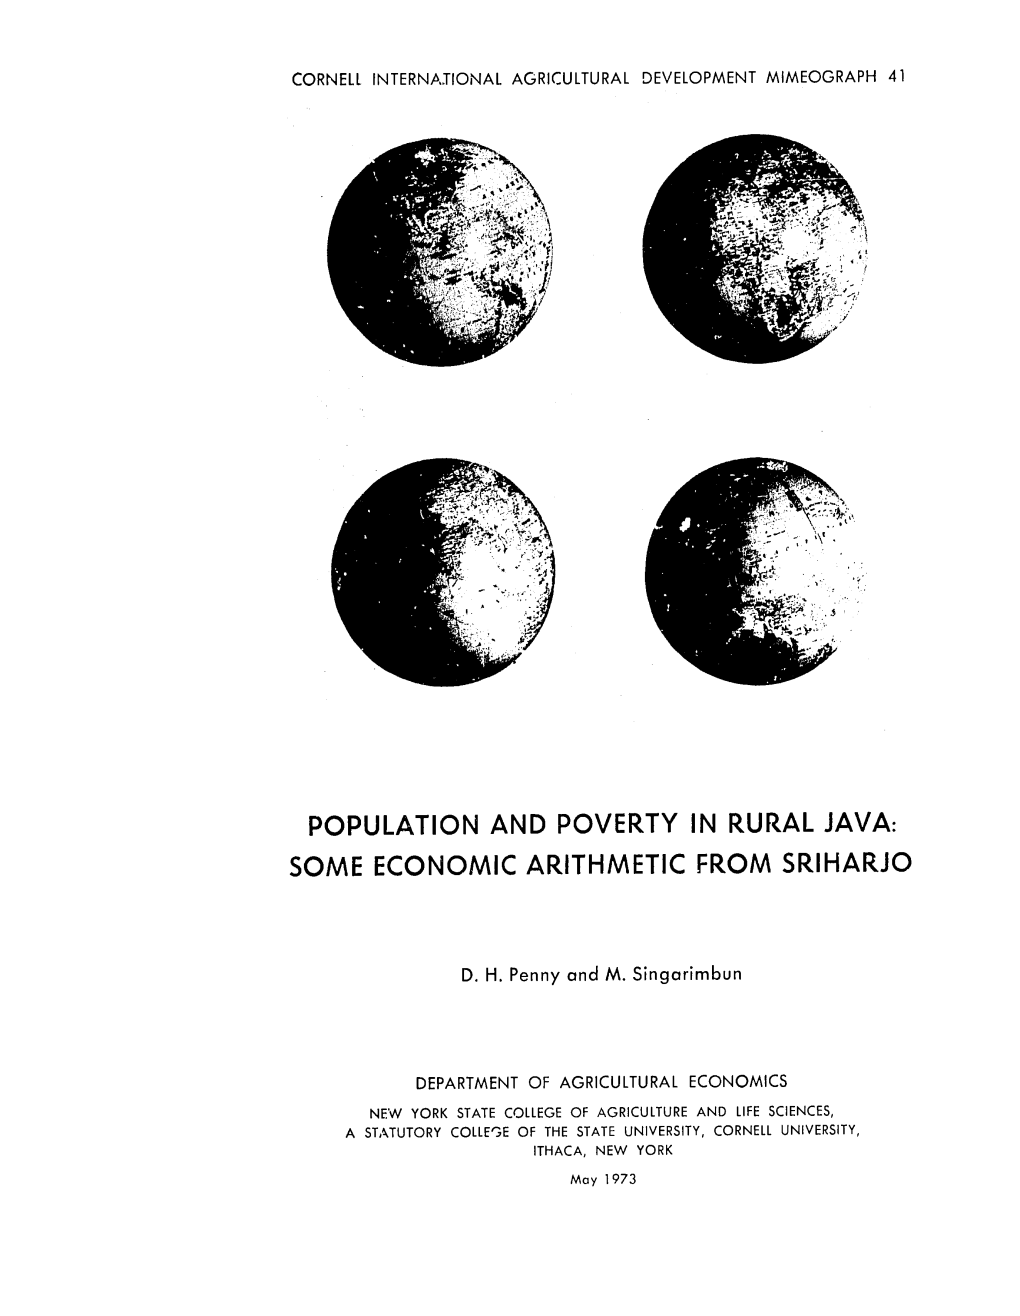 Population and Poverty in Rural Java: Some Economic Arithmetic from Sriharjo